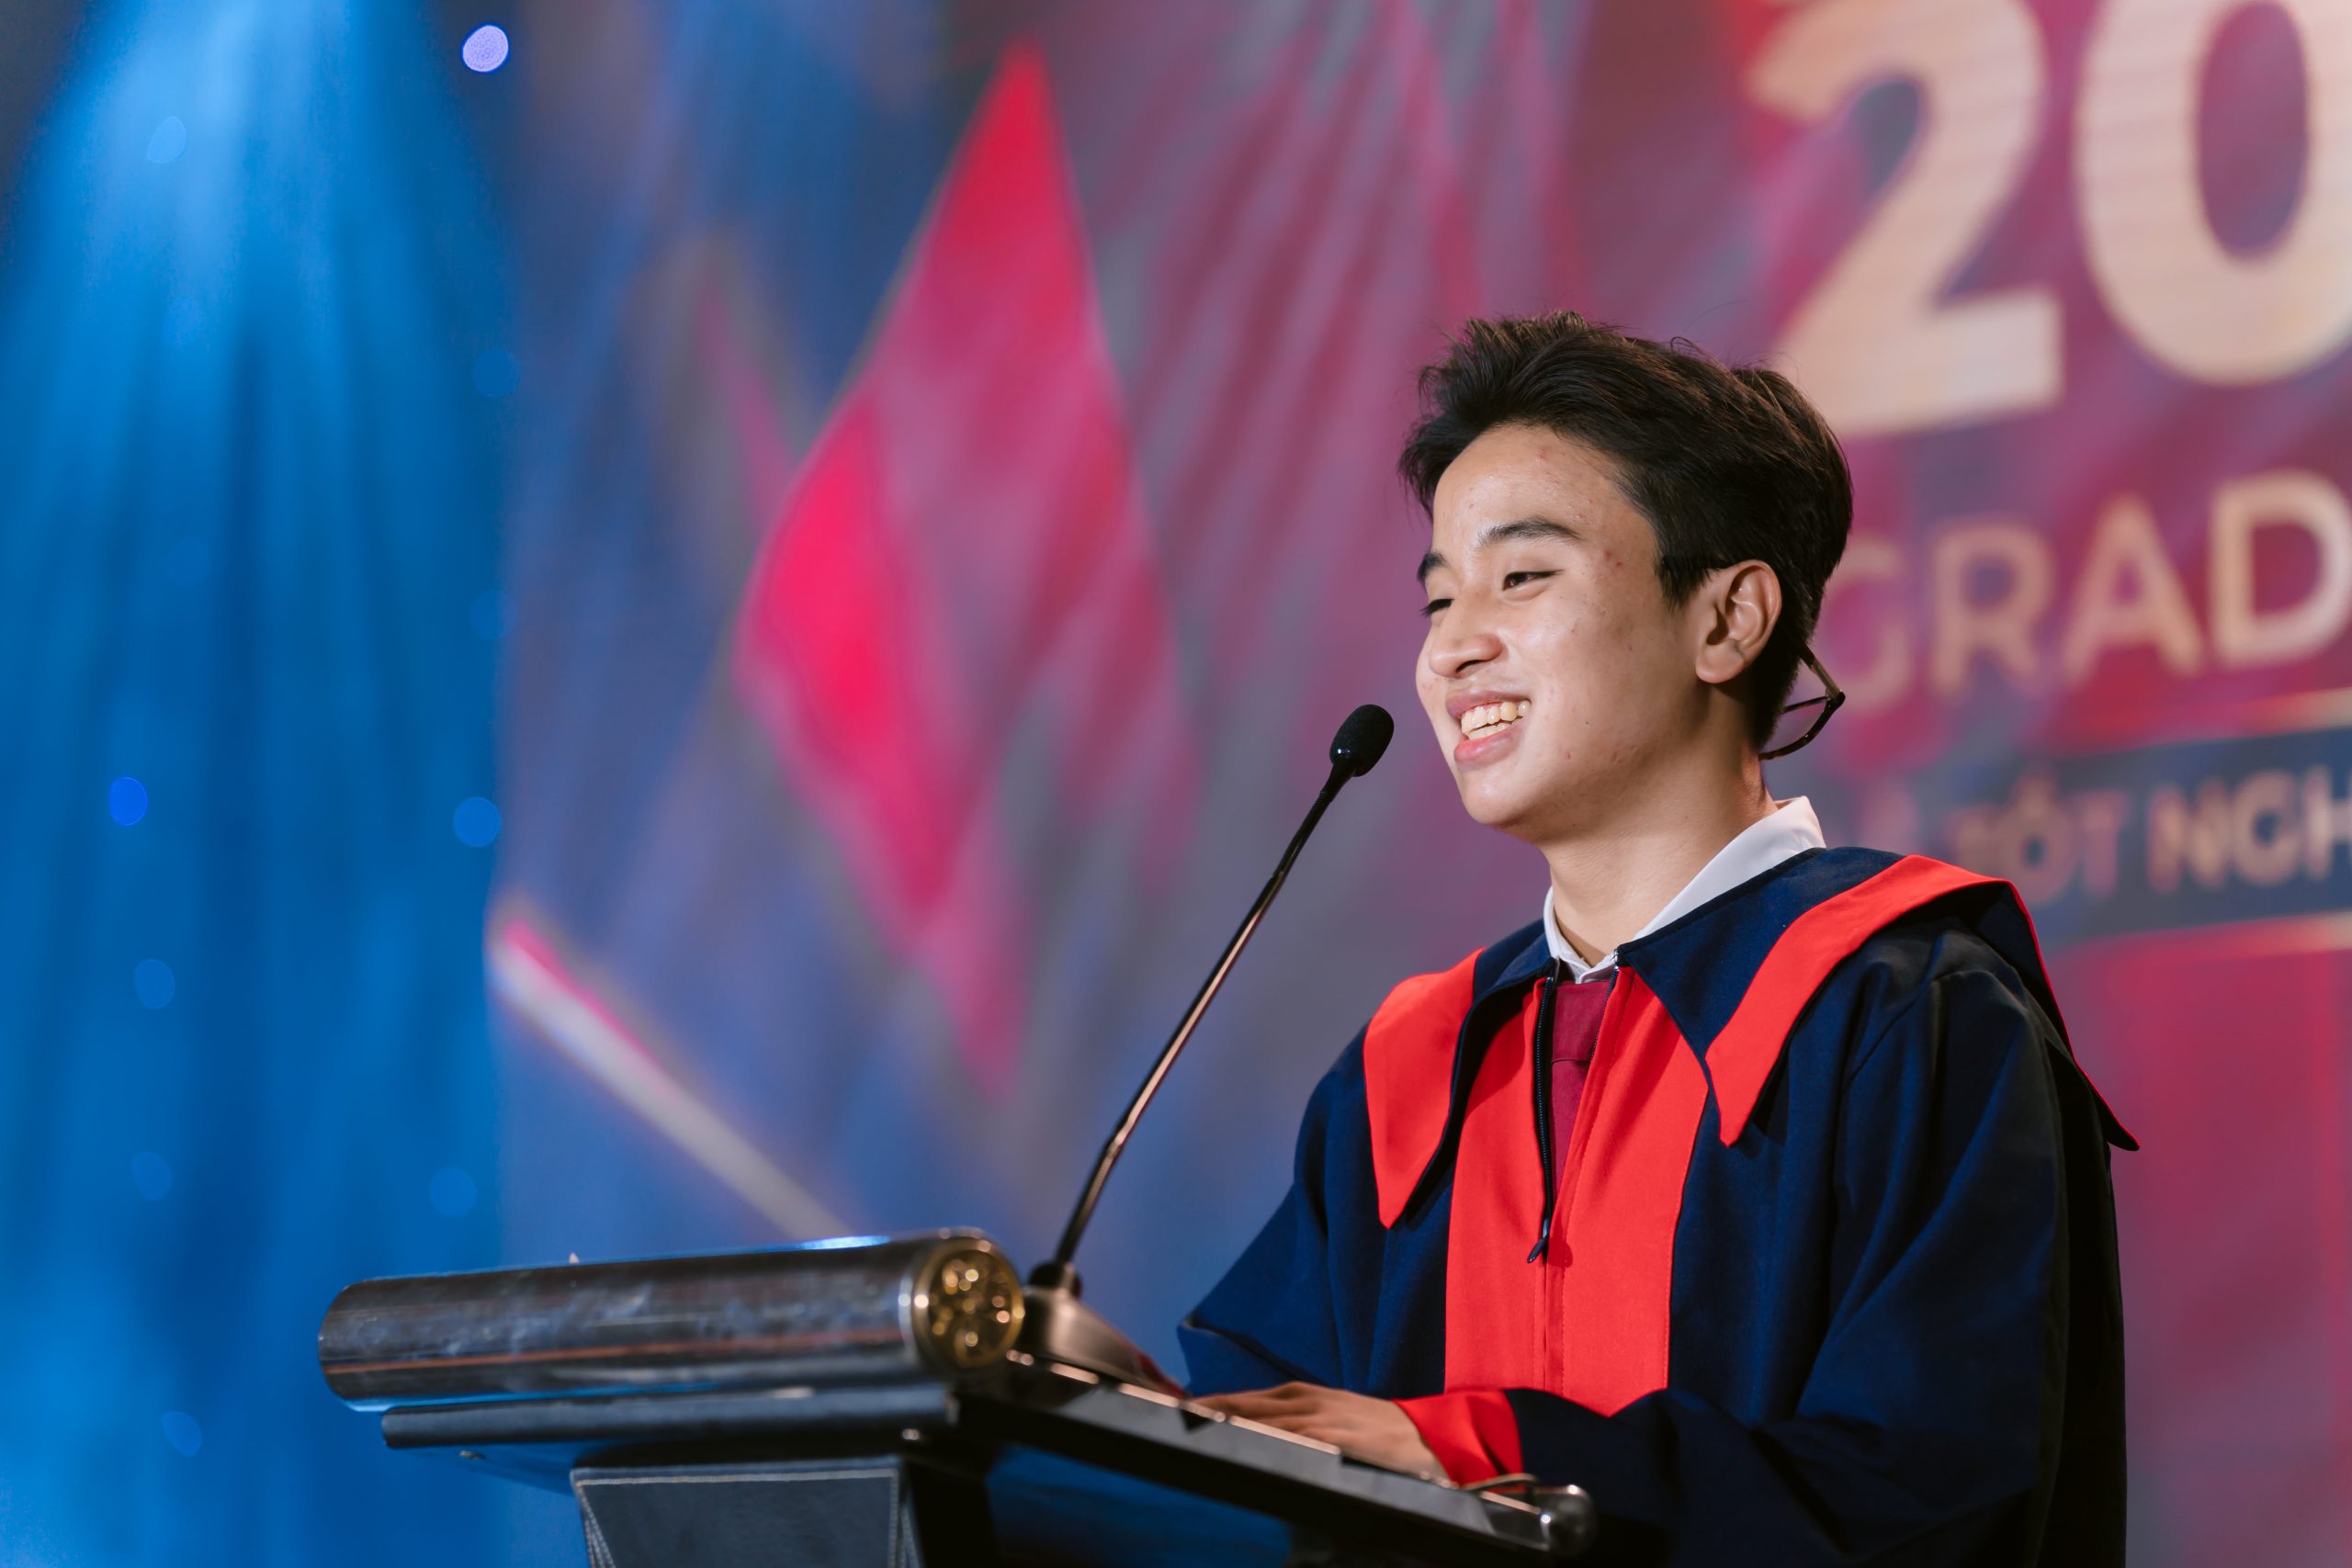 Vinser Vo Nam Khanh earns 5.5 billion VND scholarship from TETR College of Business – Studying across 7 countries in 4 years of university